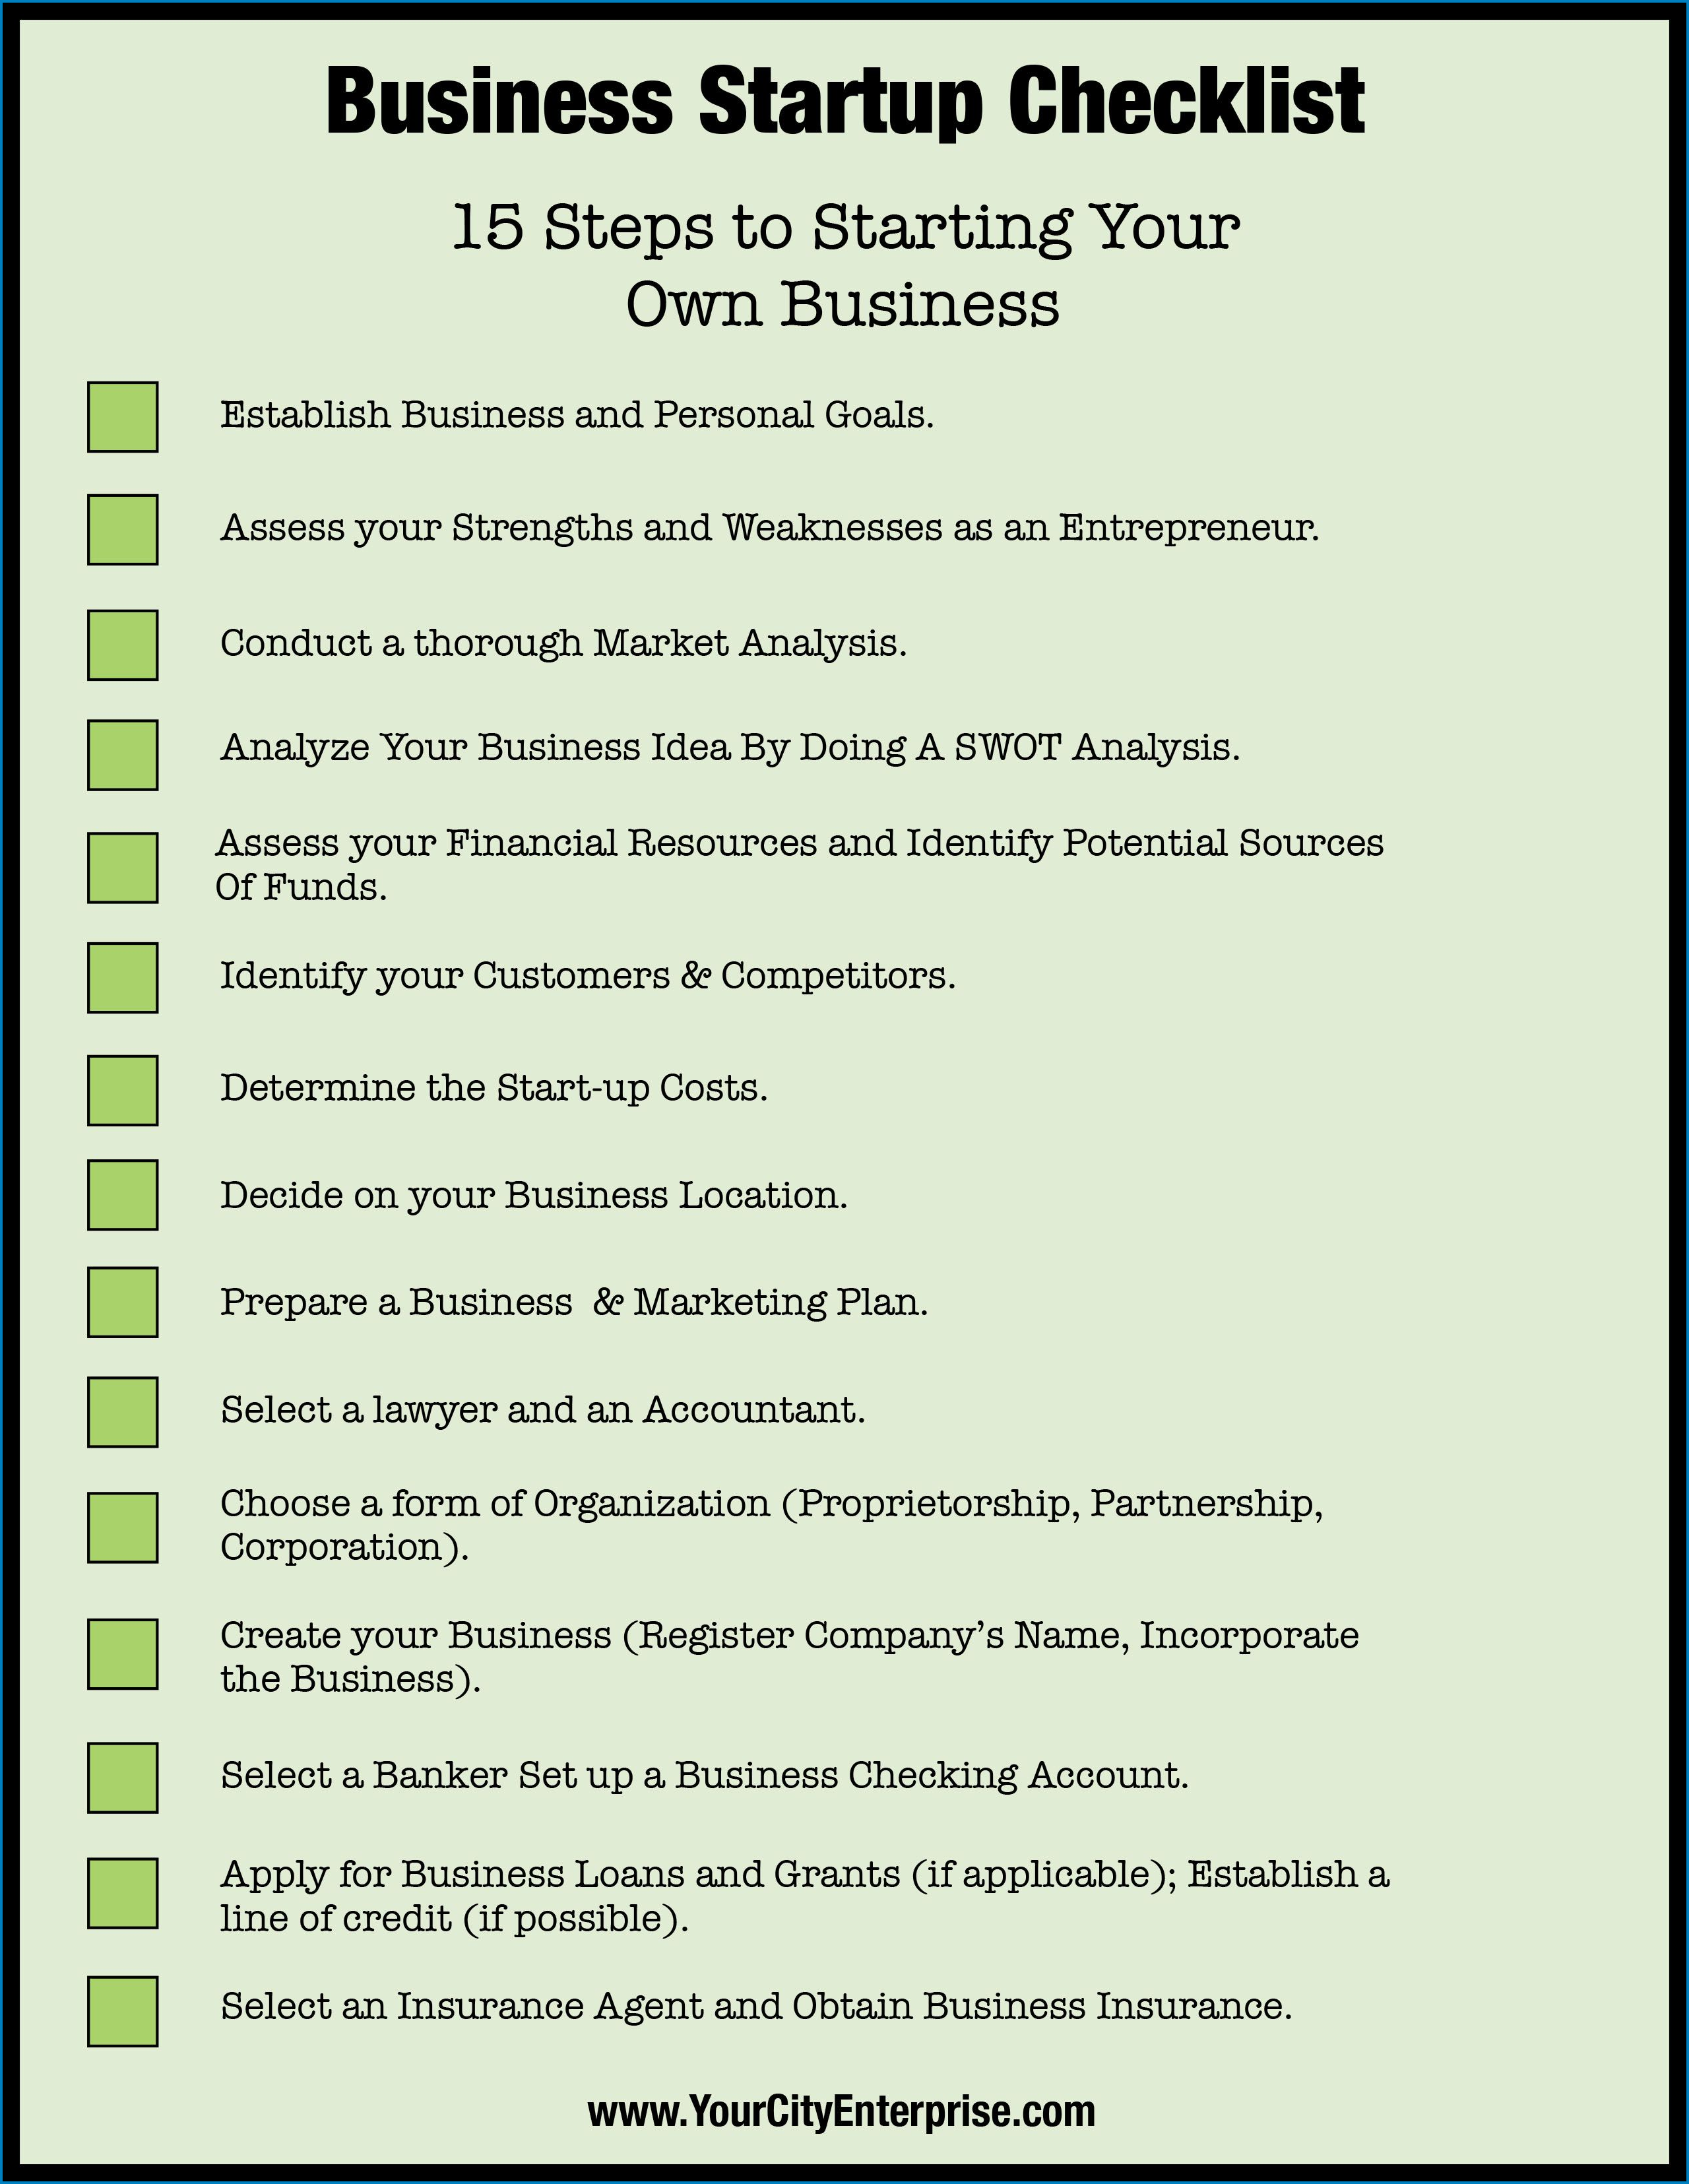 Sample of Startup Business Checklist Template